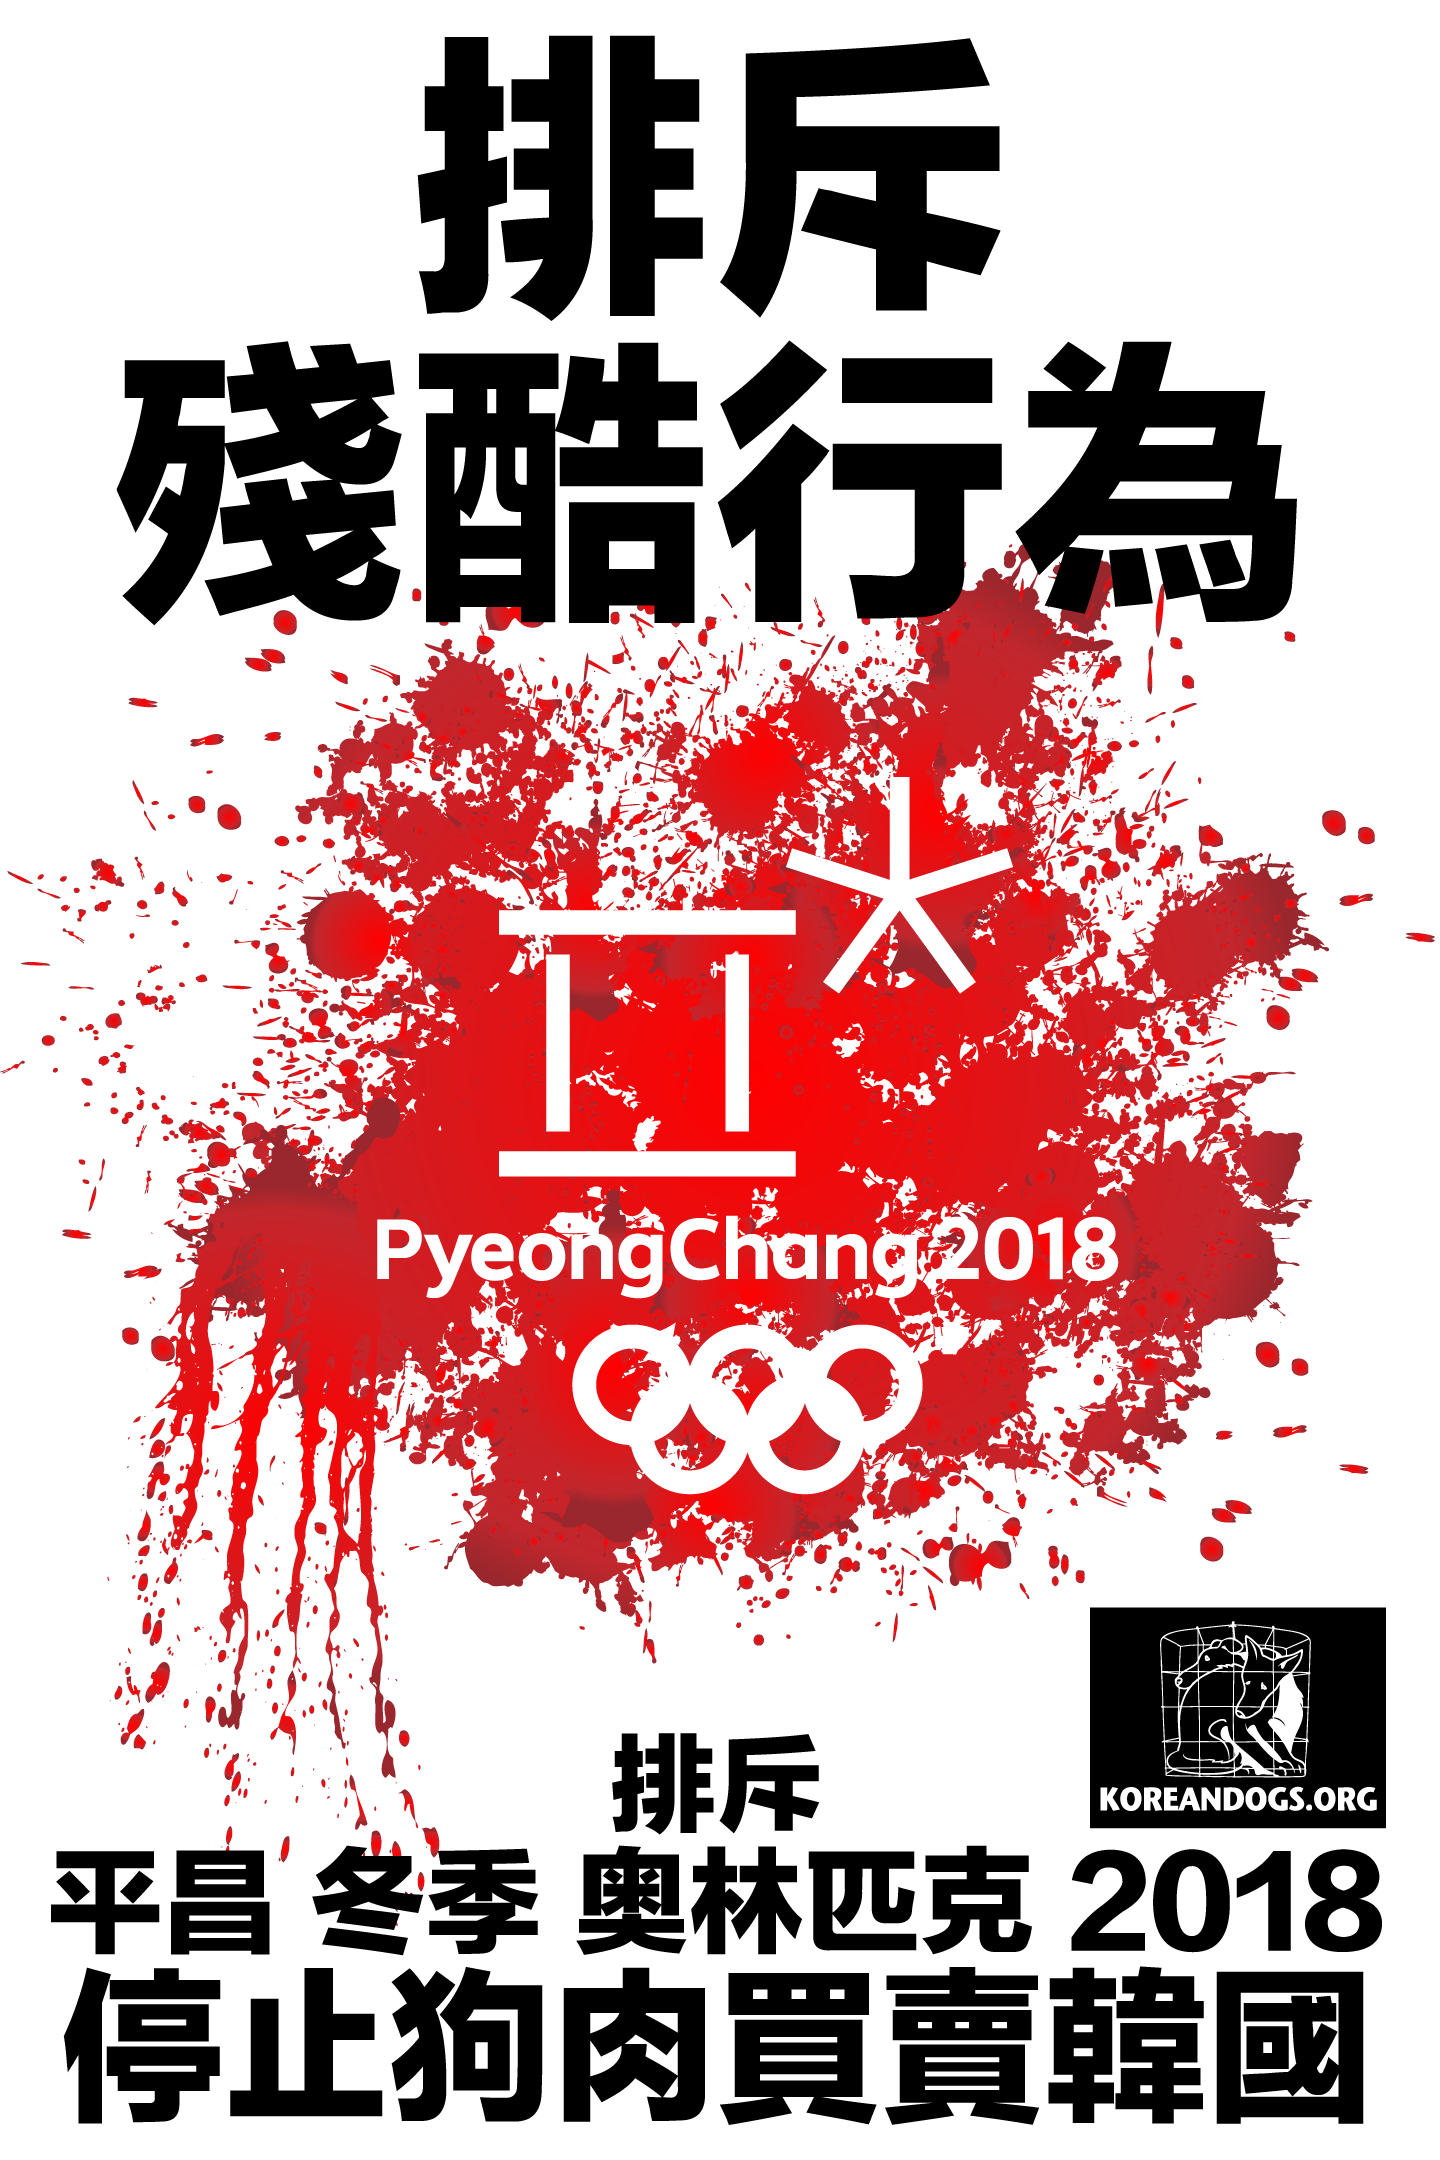 National Olympic Committees: Take a stand in Pyeongchang 2018 against the dog and cat meat trade!